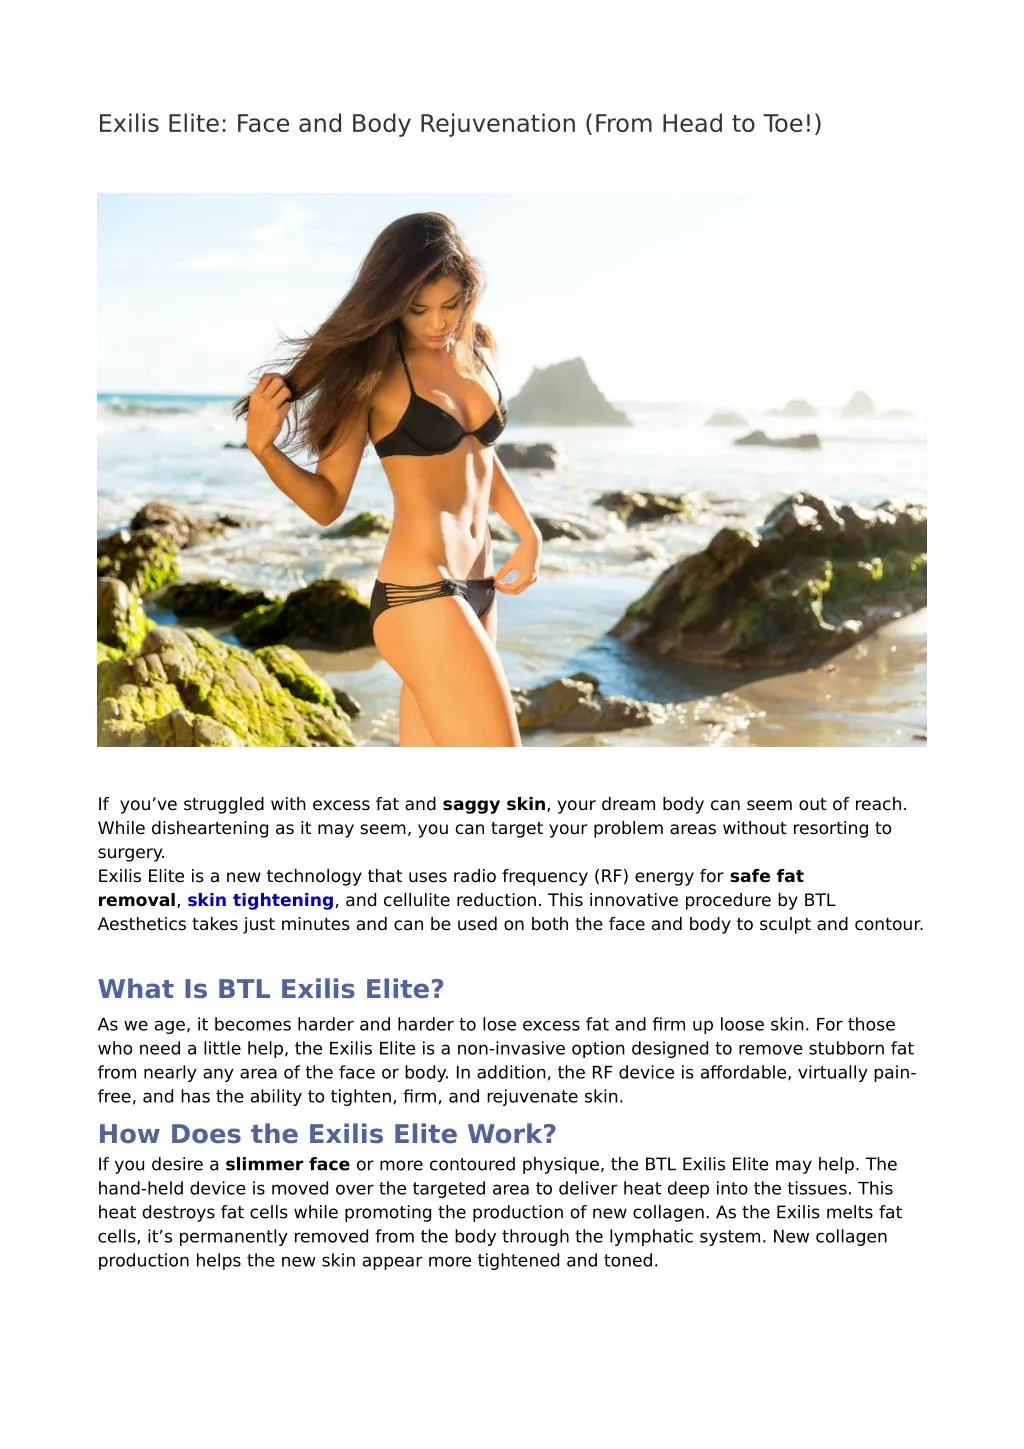 exilis elite face and body rejuvenation from head